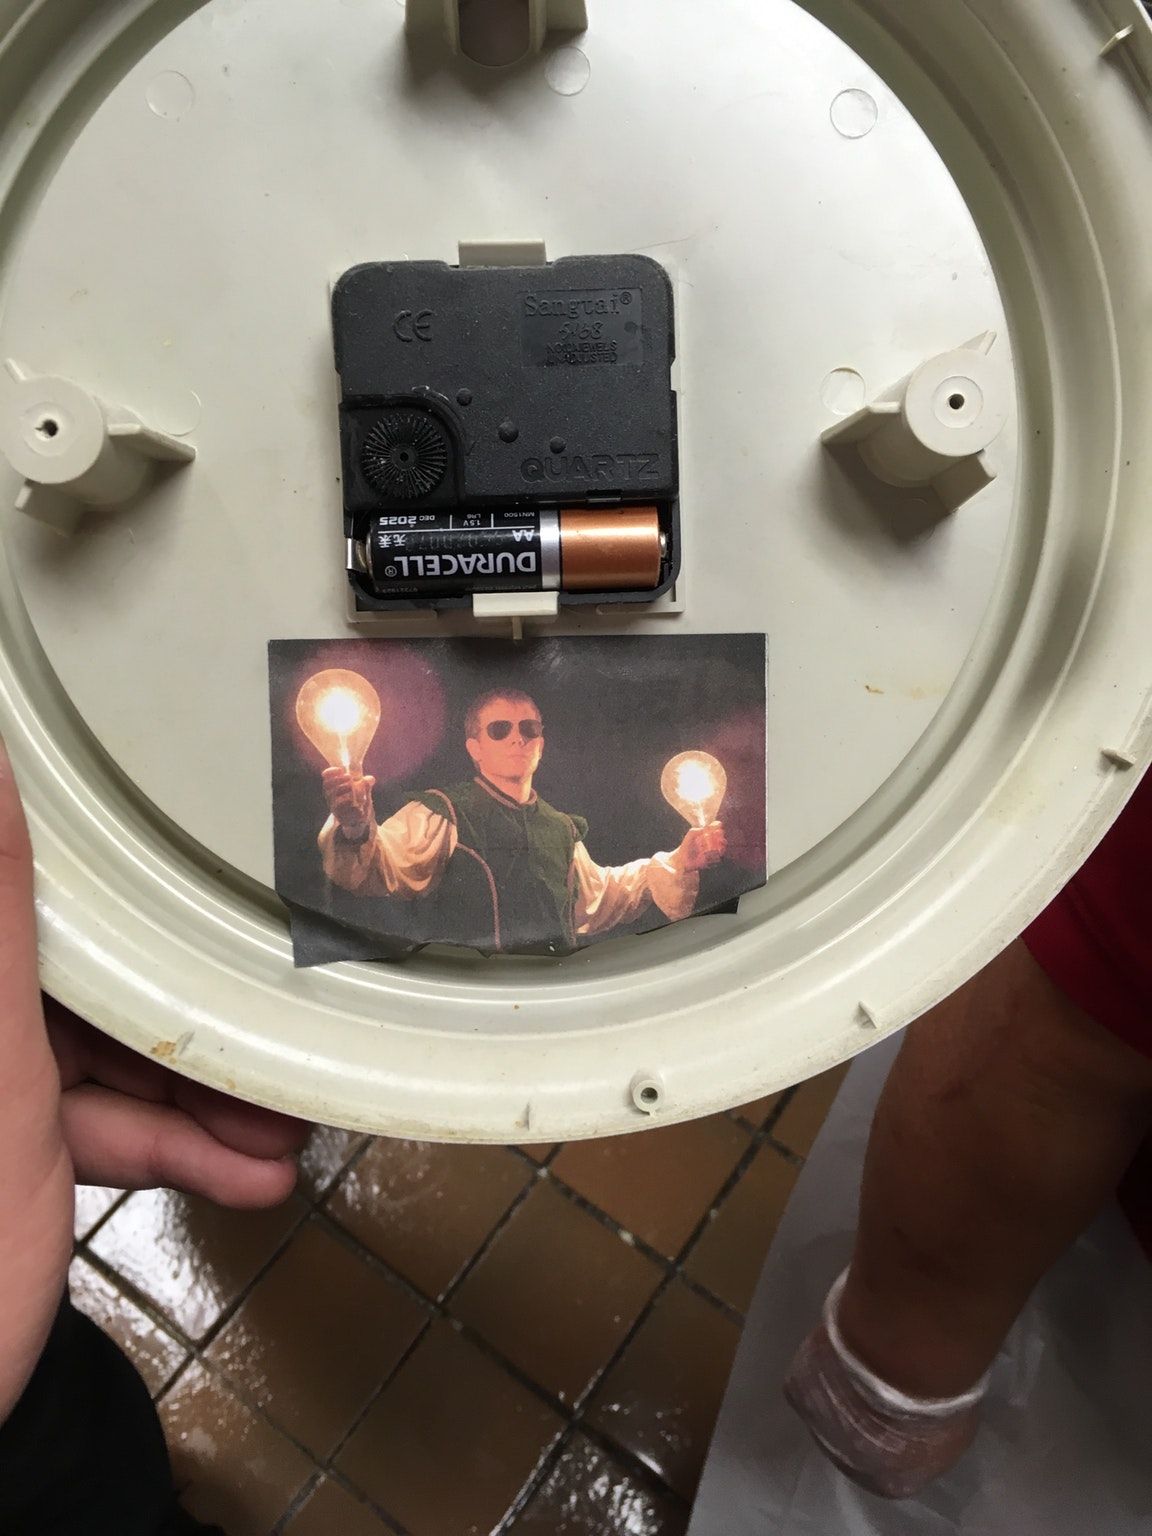 A co-worker posted pictures of himself in random places when he quit. This is the back of a clock, and he quit 2 years ago.